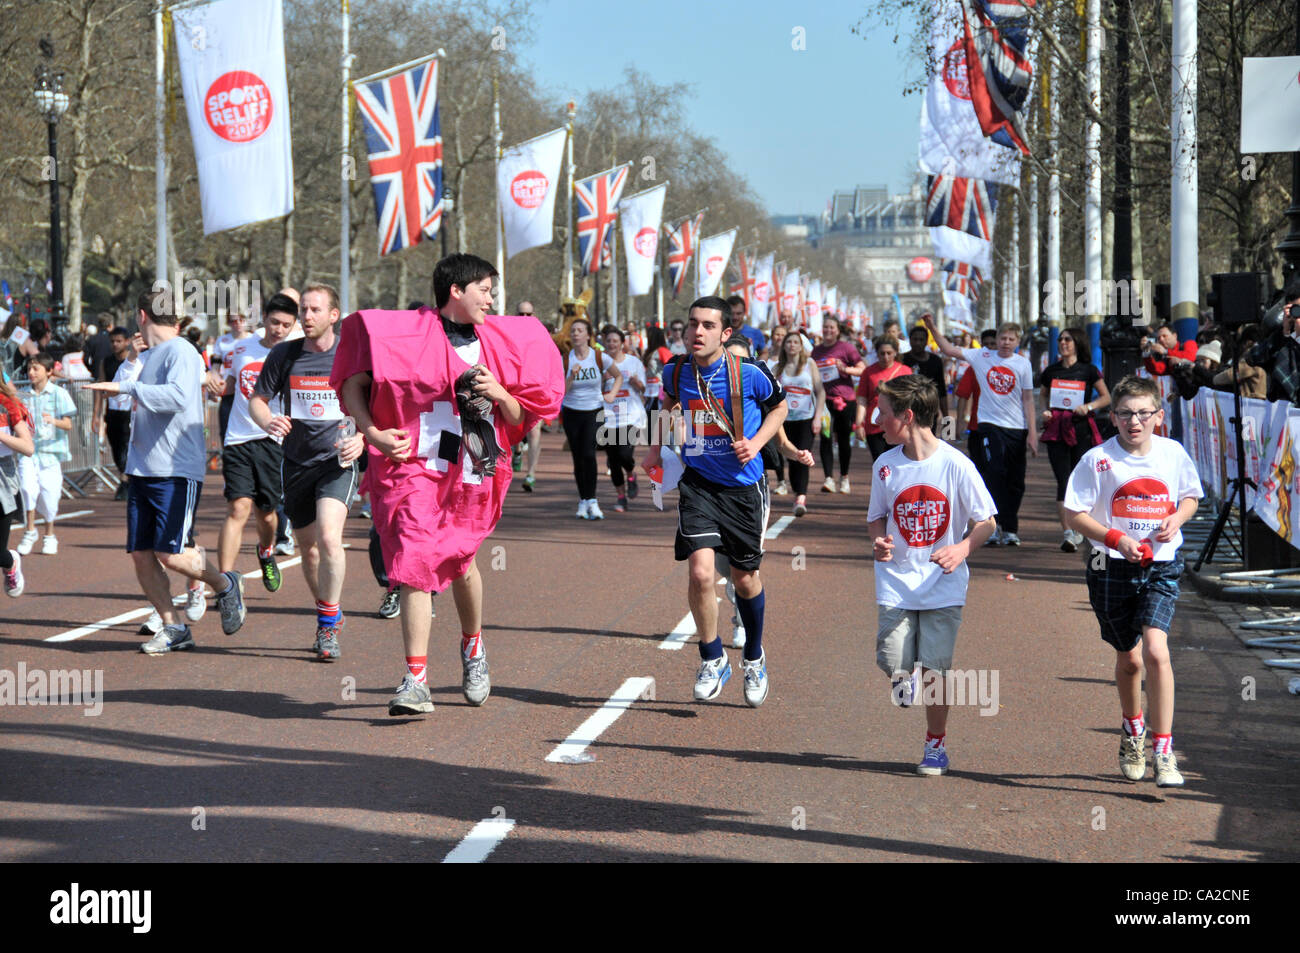 Competitors near the finish line on The Mall. London 25/3/12. Sainsbury's Sport Relief 2012 Mile Run in central London, competitors take part in the charity run along The Mall near Buckingham Palace. Stock Photo